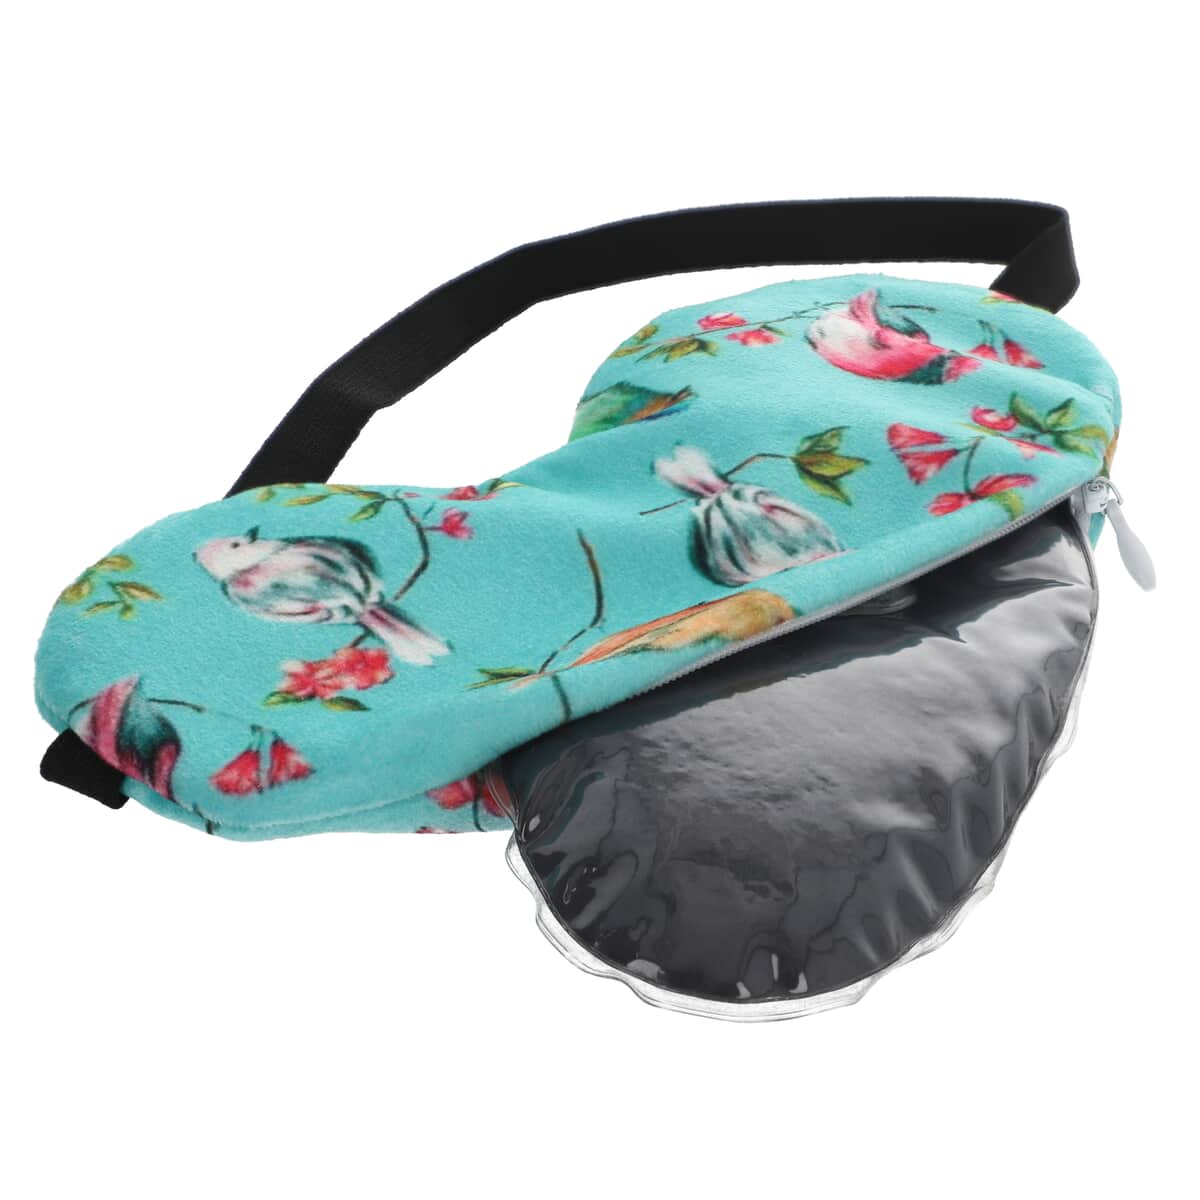 Multi Color Printed Cotton, Shungite Weighted Reusable Eye Mask with Shungite Gel Sleeve and Adjustable Strap image number 5